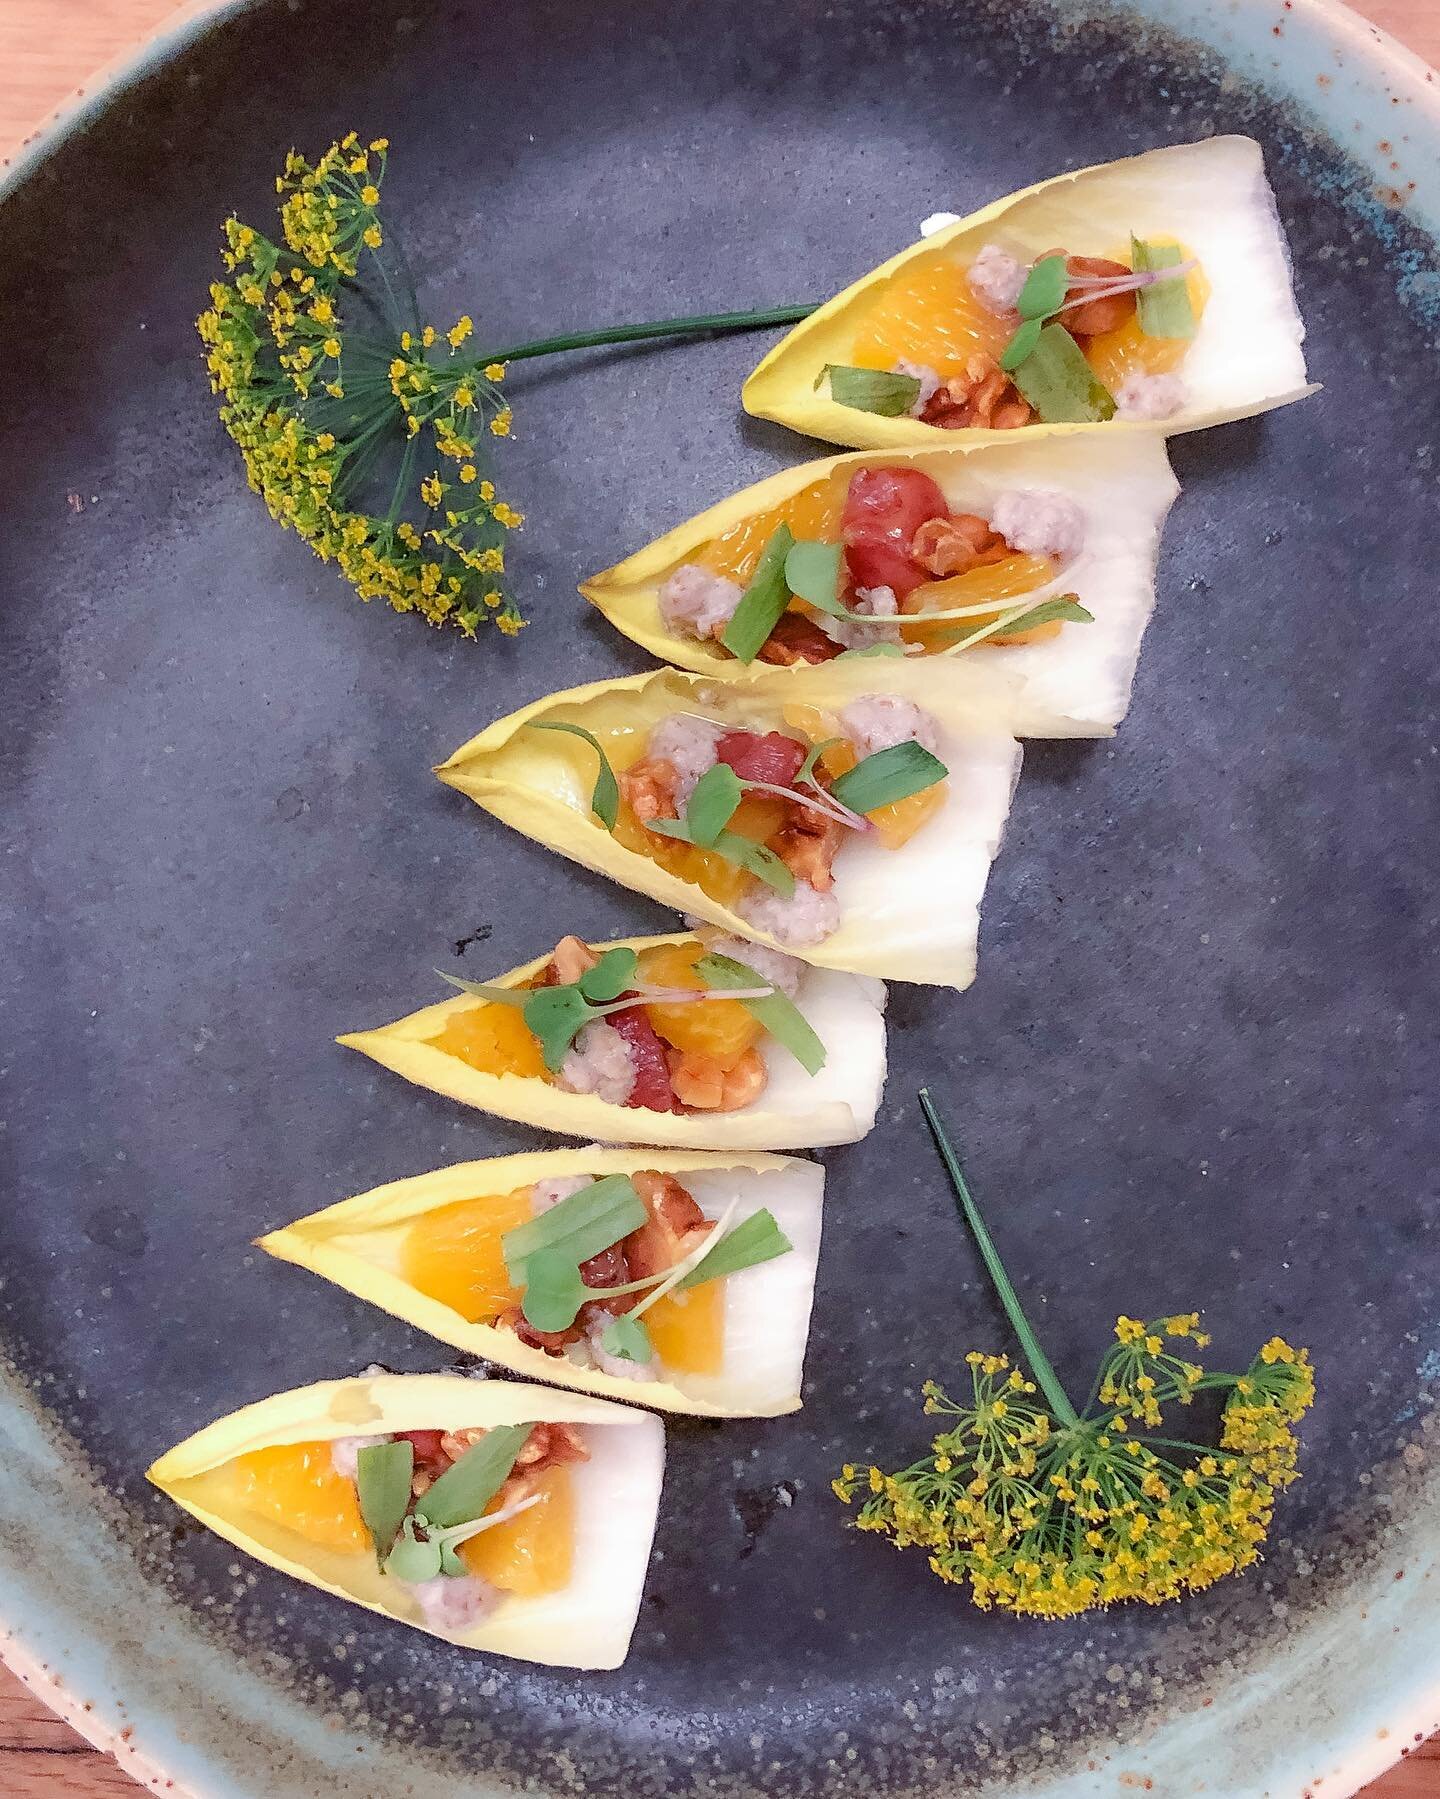 Endive with roasted grapes, toasted walnuts, orange segments, tarragon, and a tahini and walnut dressing. 

Delicious vegan one bite canap&eacute; @home_grown_meals 

📸: @aldisjoi 
🍽: @caracaraorange 

#vegan #events #canapes #horsdoeuvres #light #